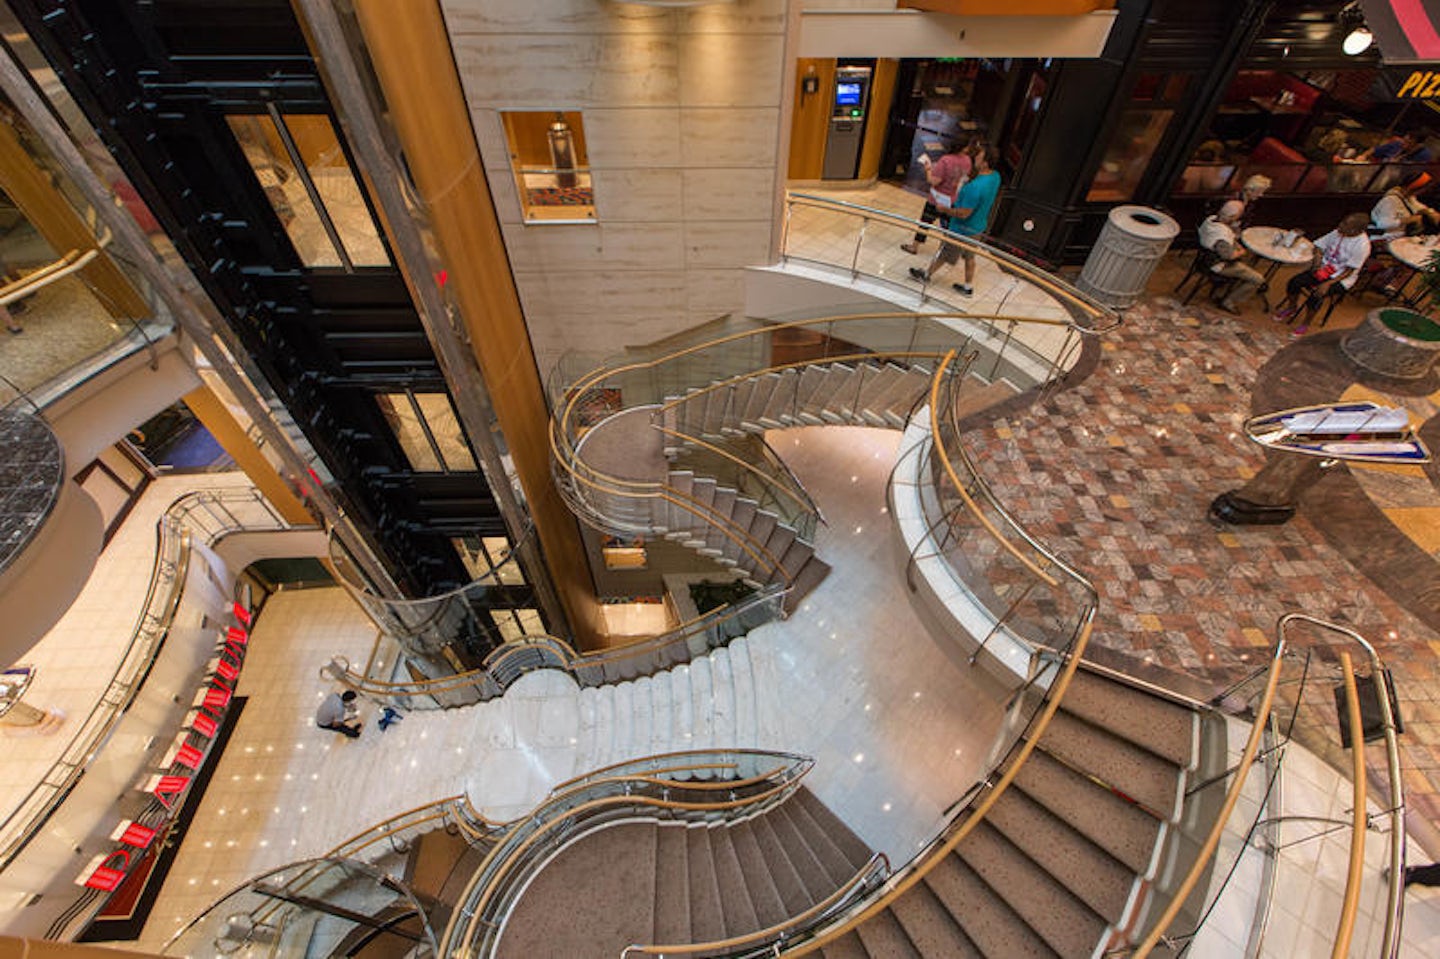 Stairs on Liberty of the Seas